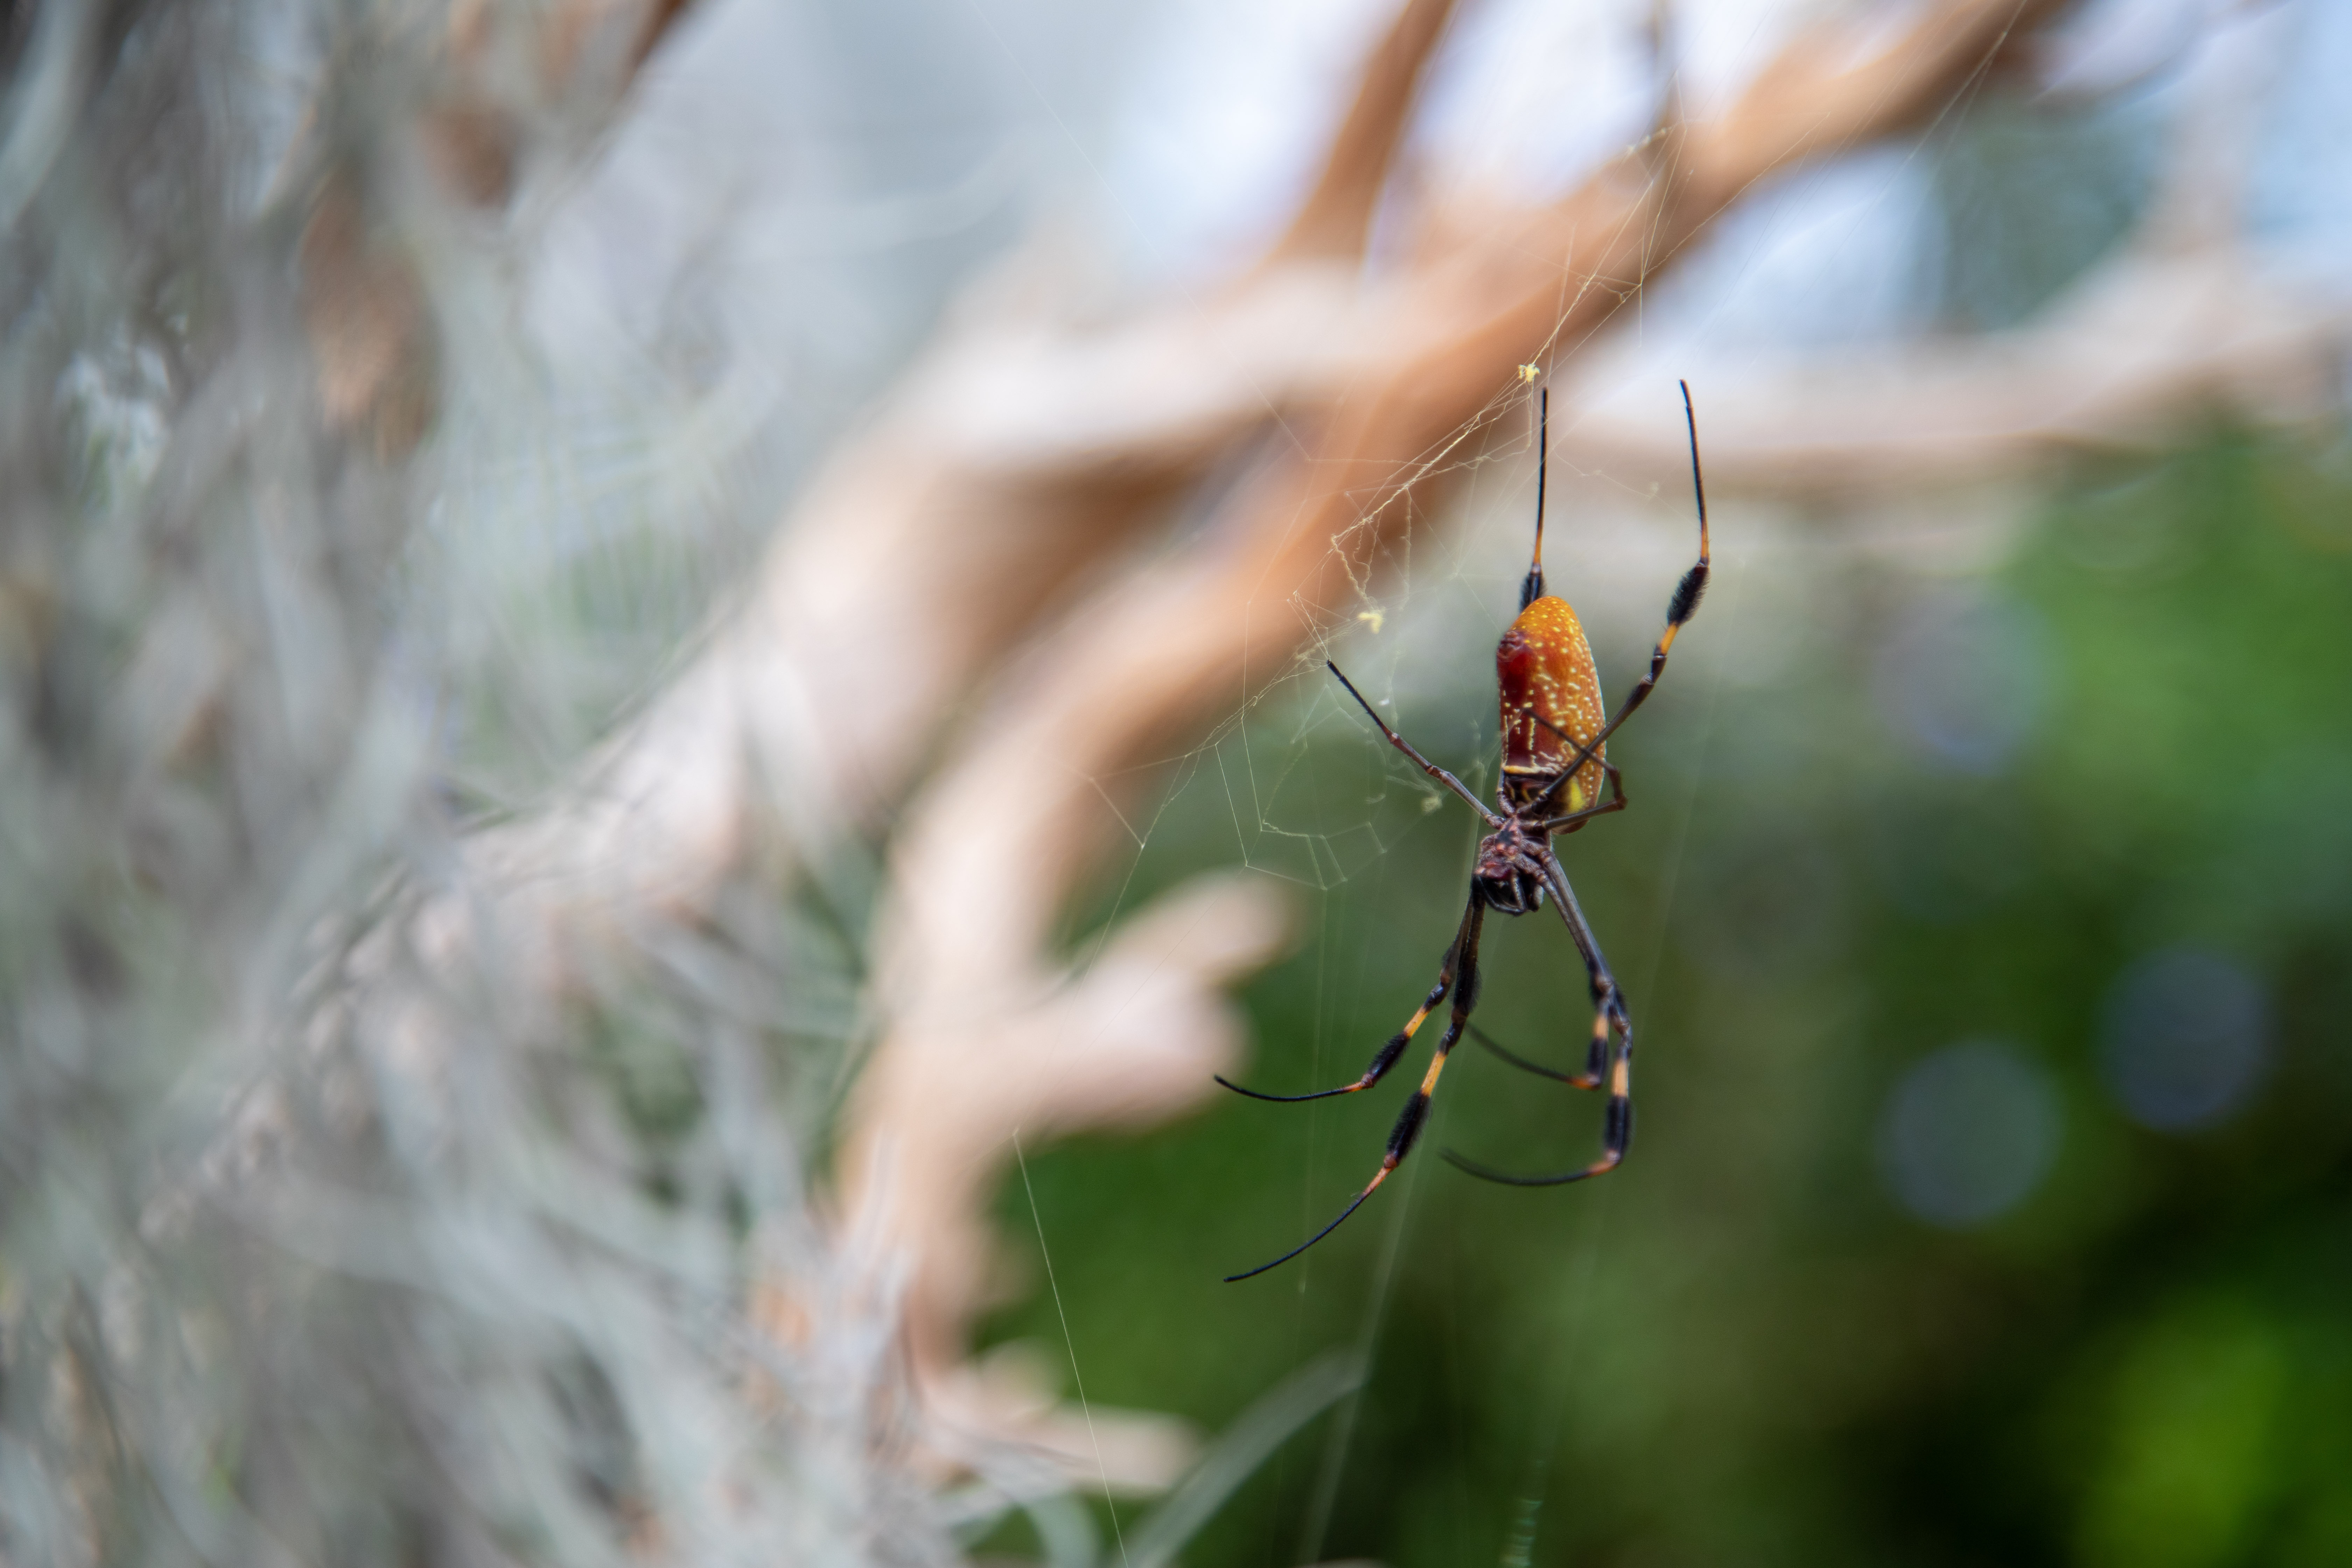 Are Spiders Considered Insects? Learn About Spiders at Our Pavilion! -  South Coast Botanic Garden Foundation